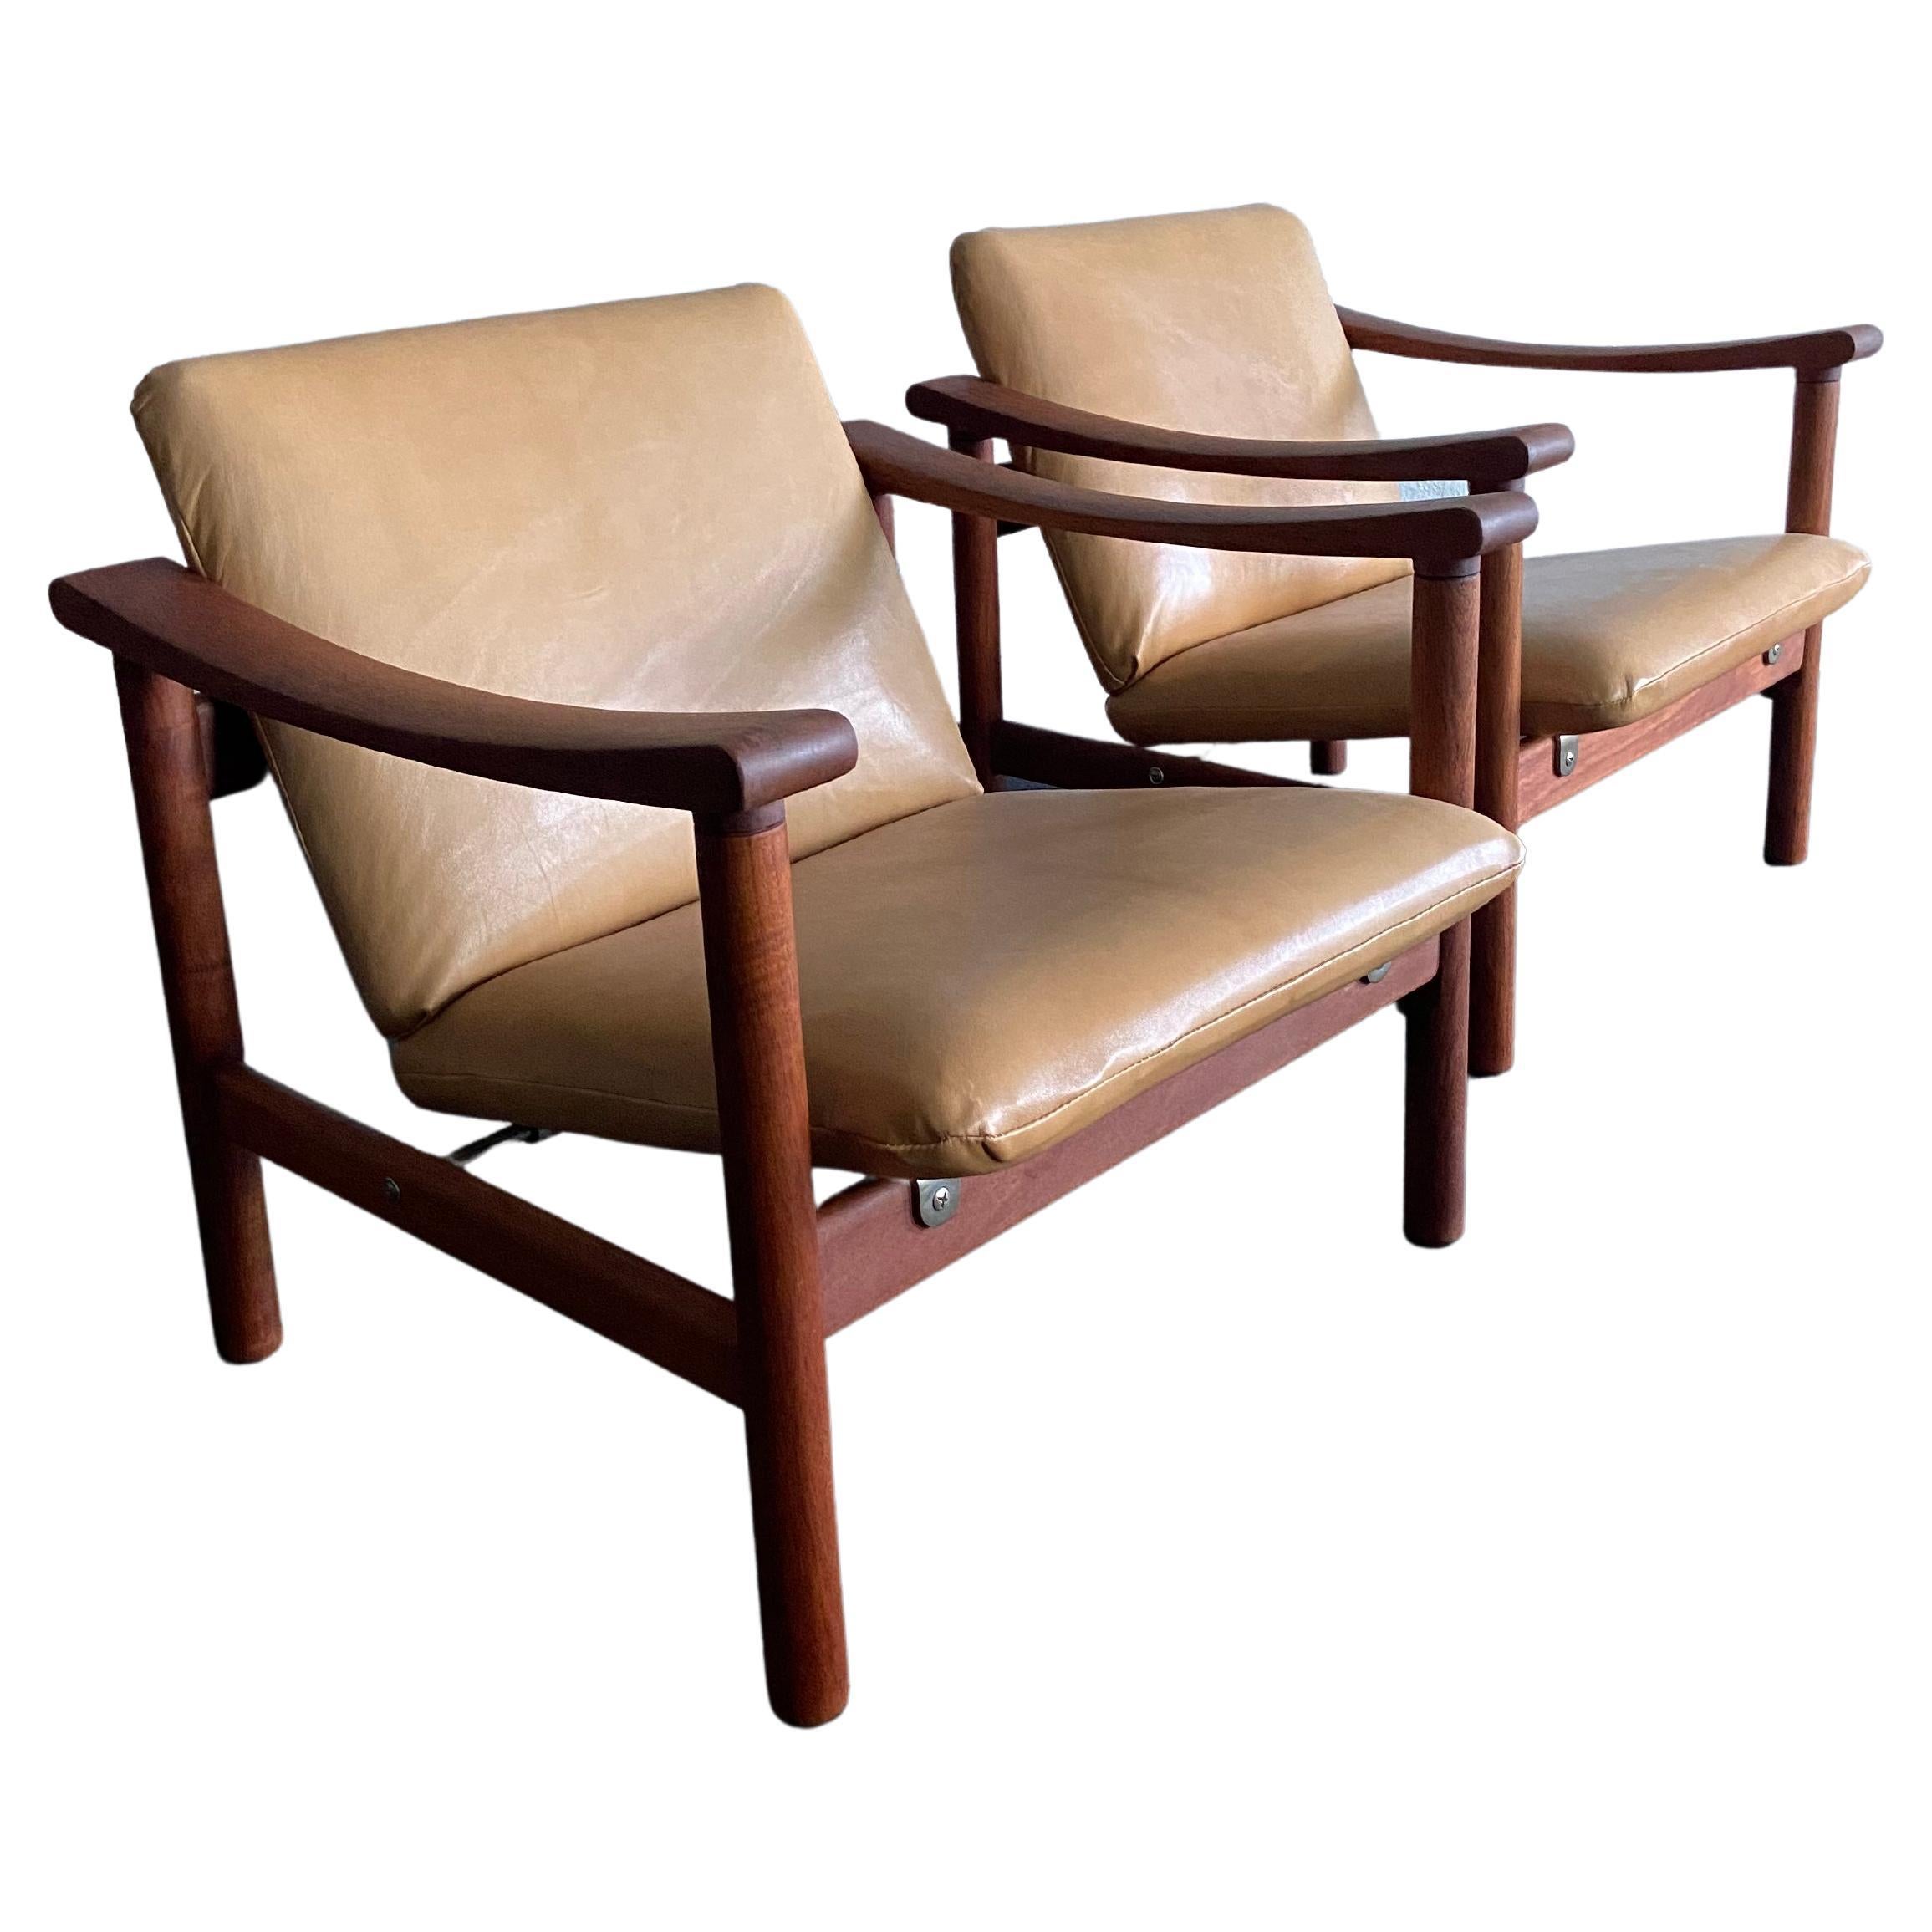 Hans Wegner for Getama Leather Lounge Chairs - a Pair For Sale